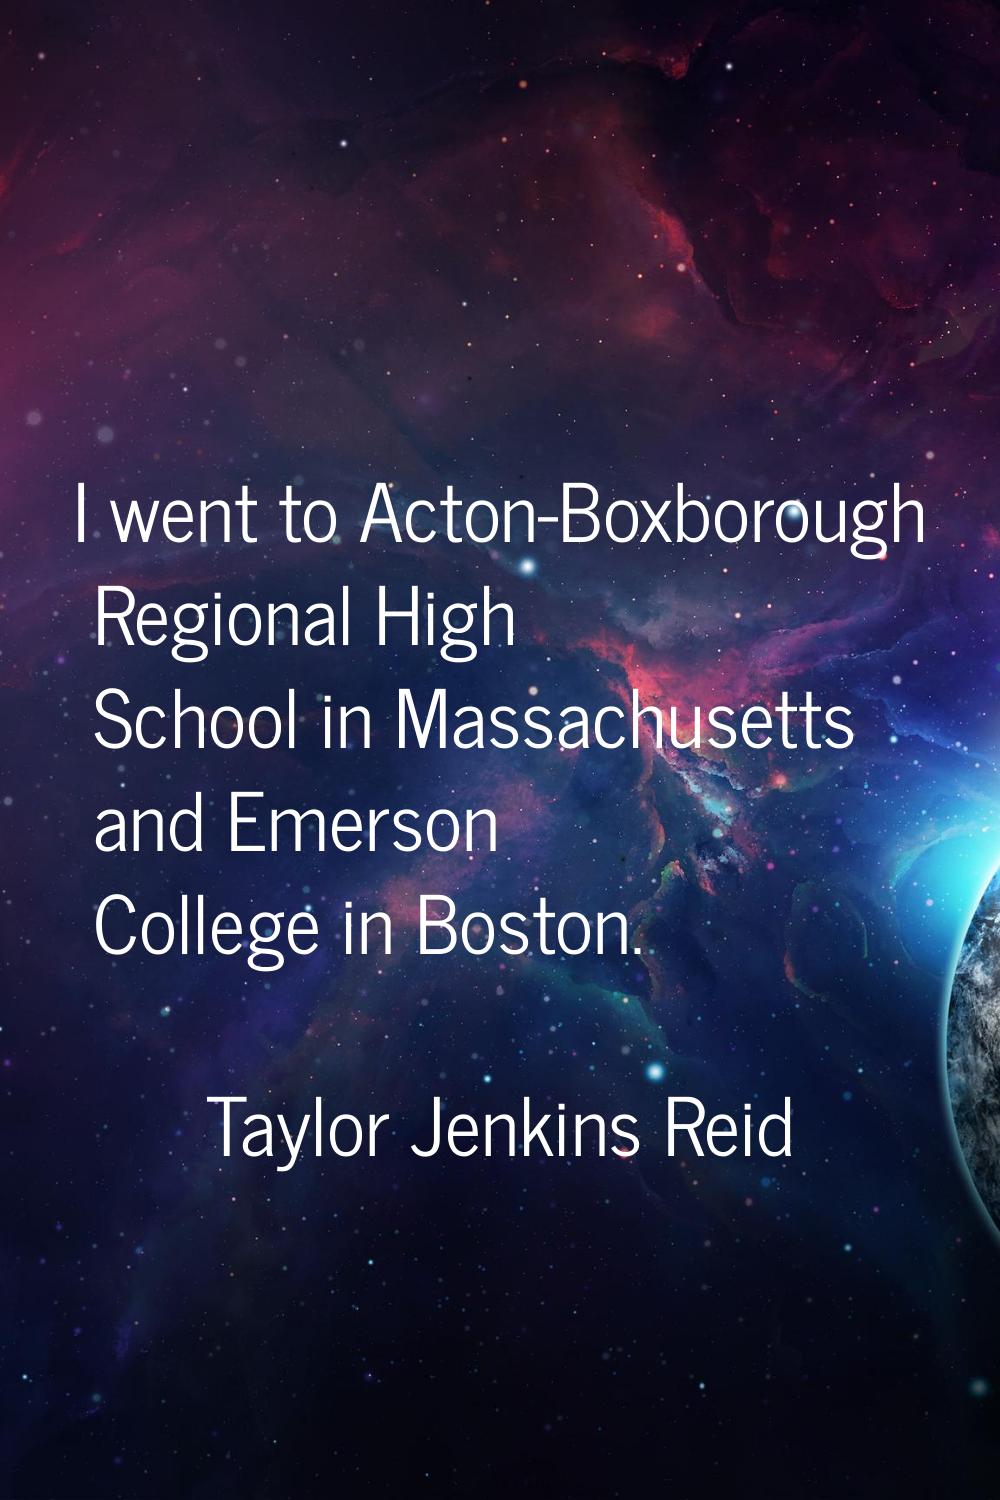 I went to Acton-Boxborough Regional High School in Massachusetts and Emerson College in Boston.